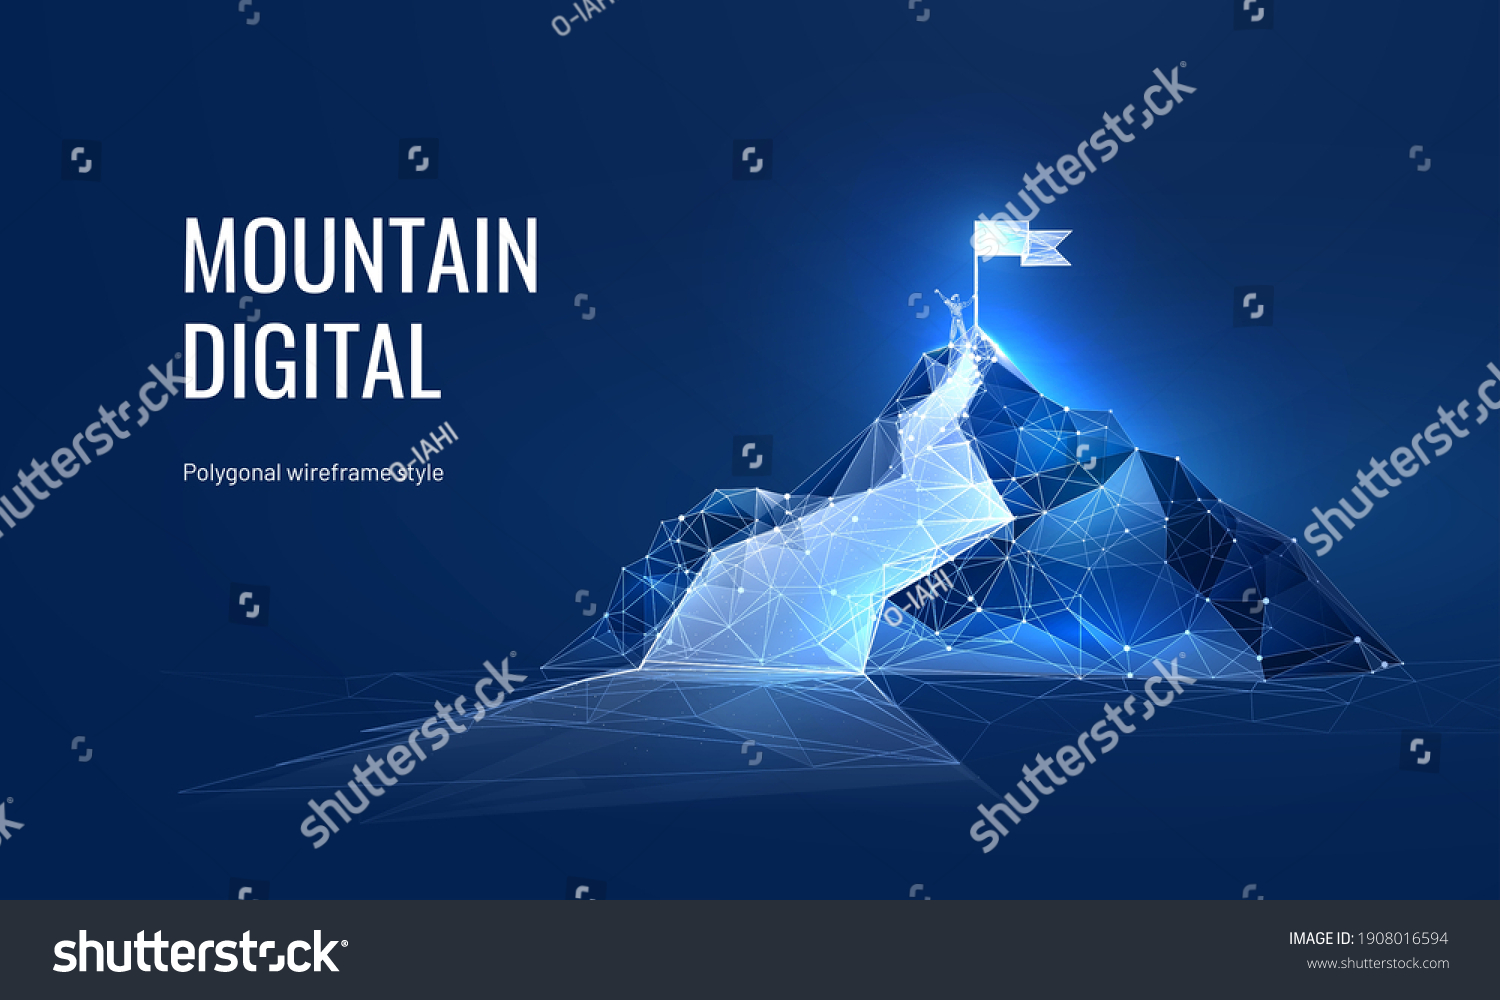 SVG of The path to success in the digital futuristic style. Business goals achievement concept. Vector illustration of a mountain with a flag in a polygonal wireframe style svg